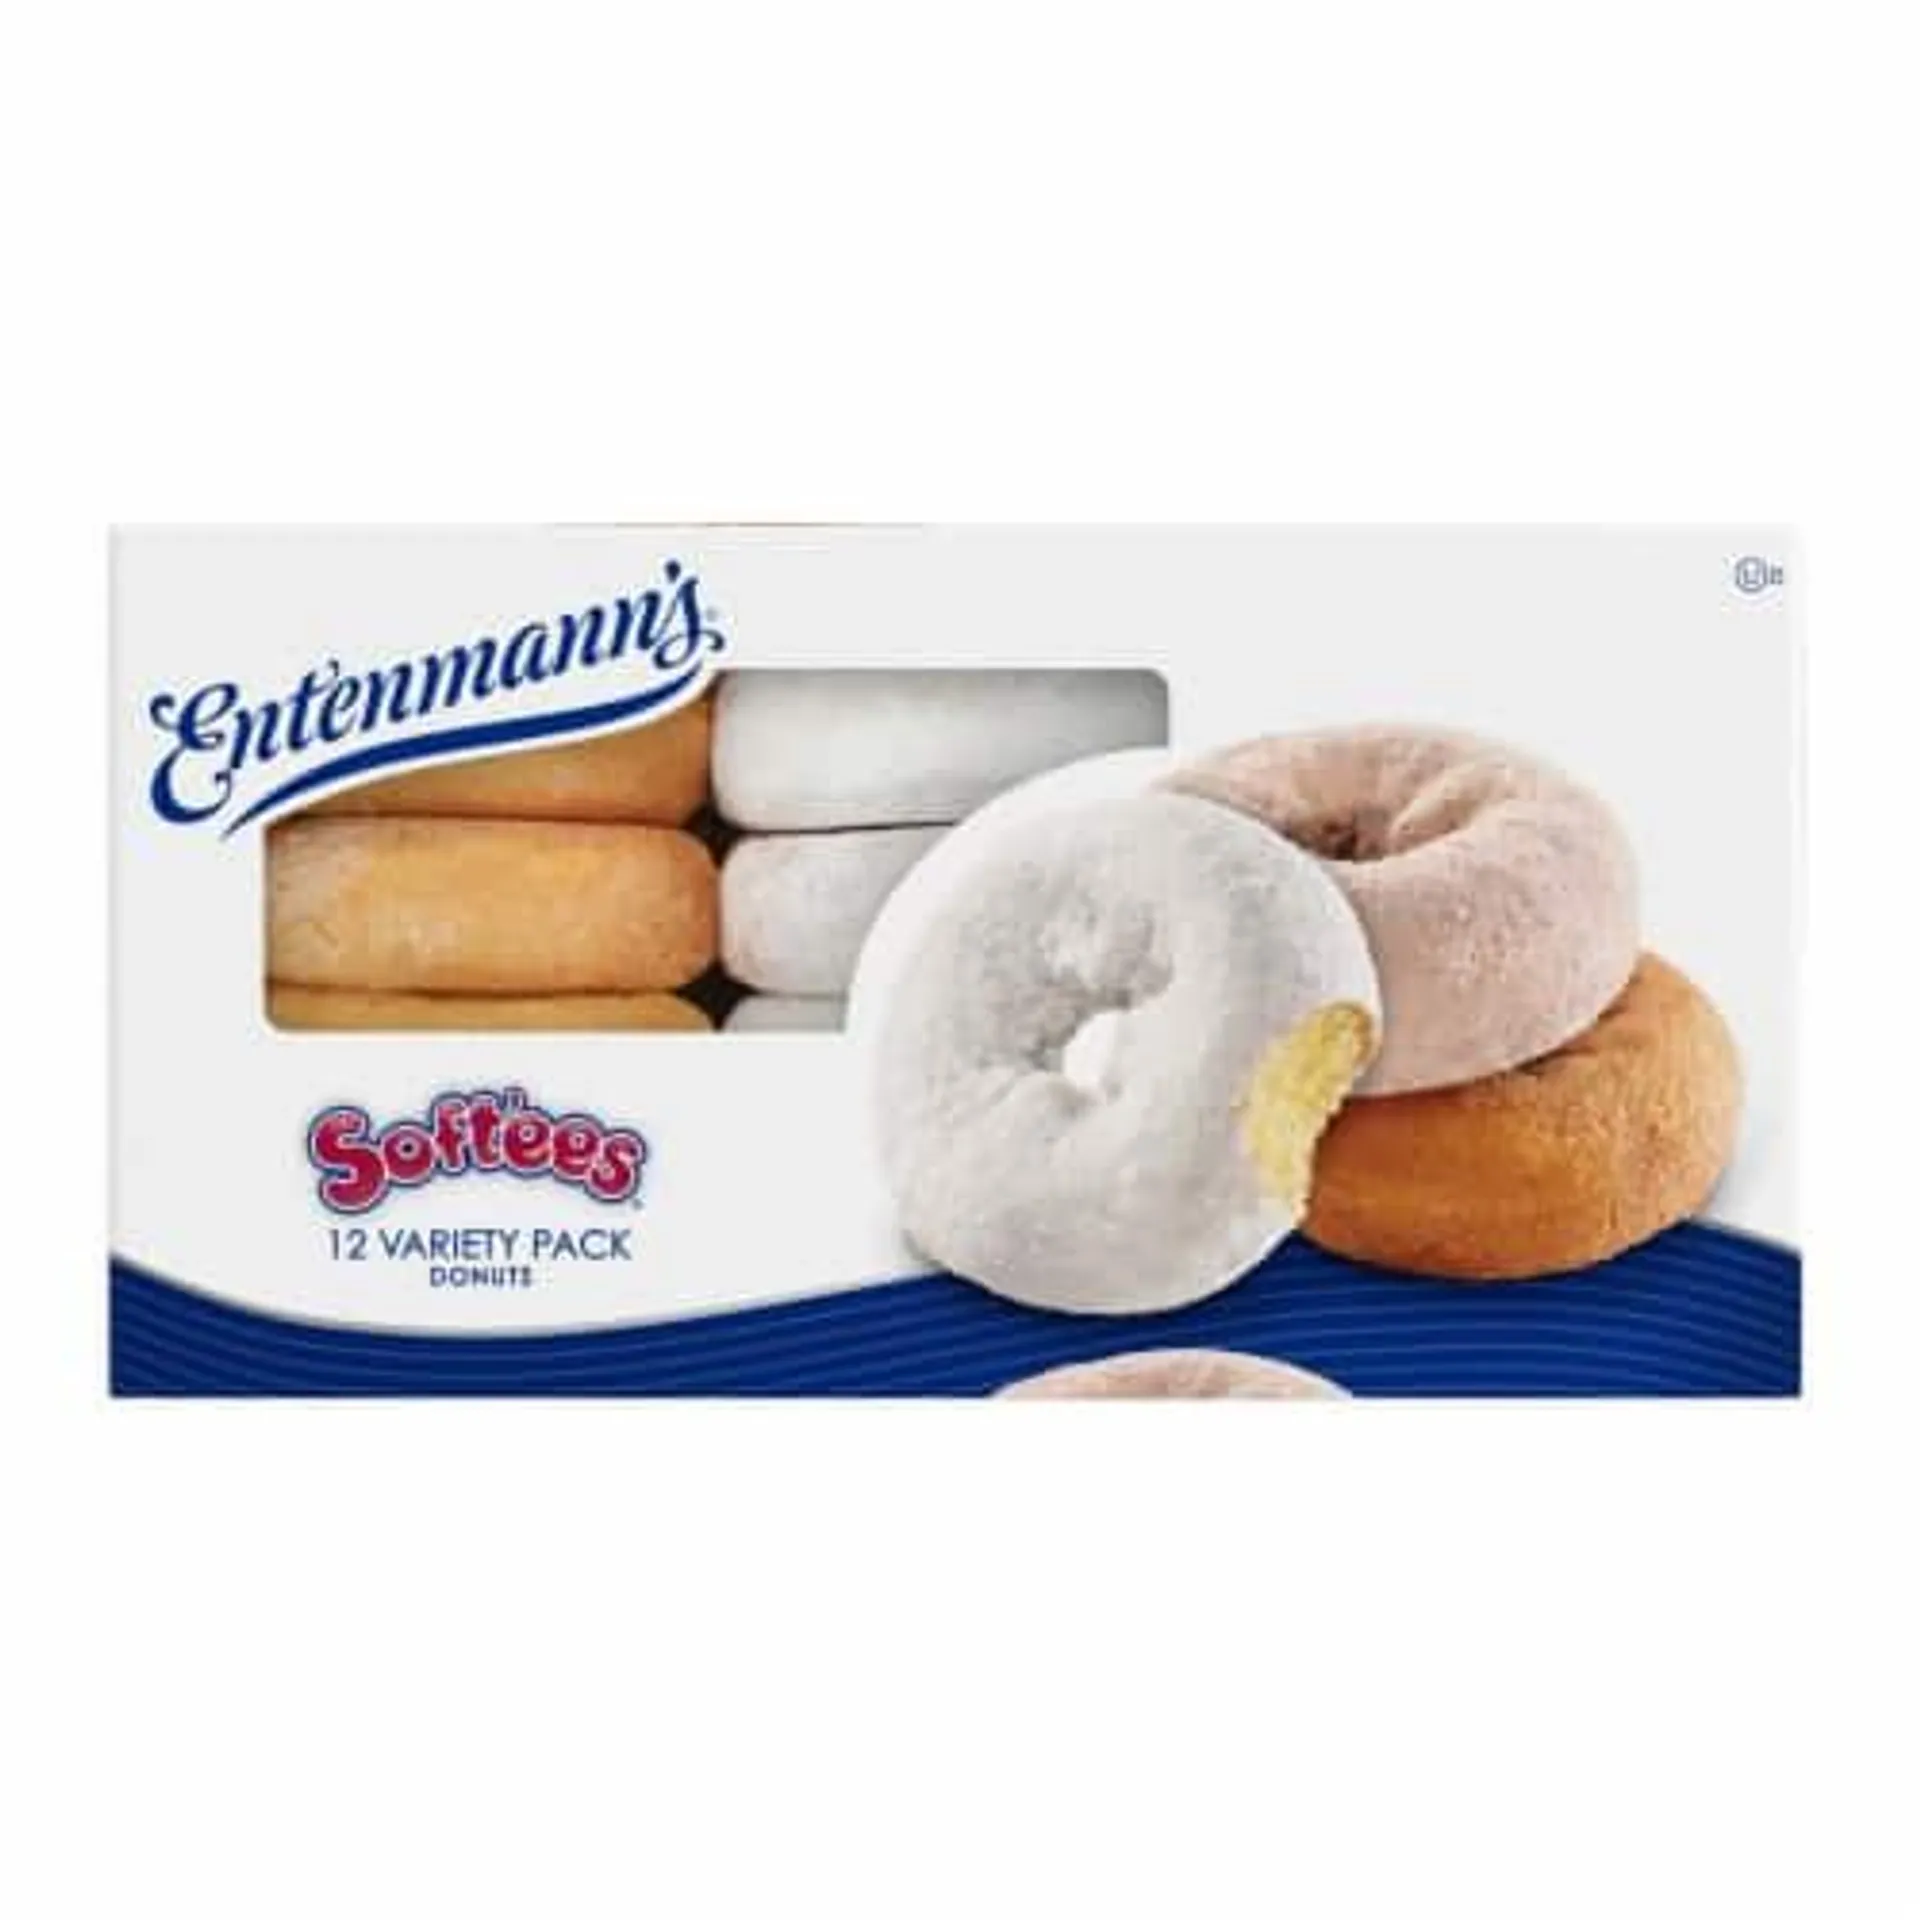 Entenmann's Soft'ees Variety Pack Donuts